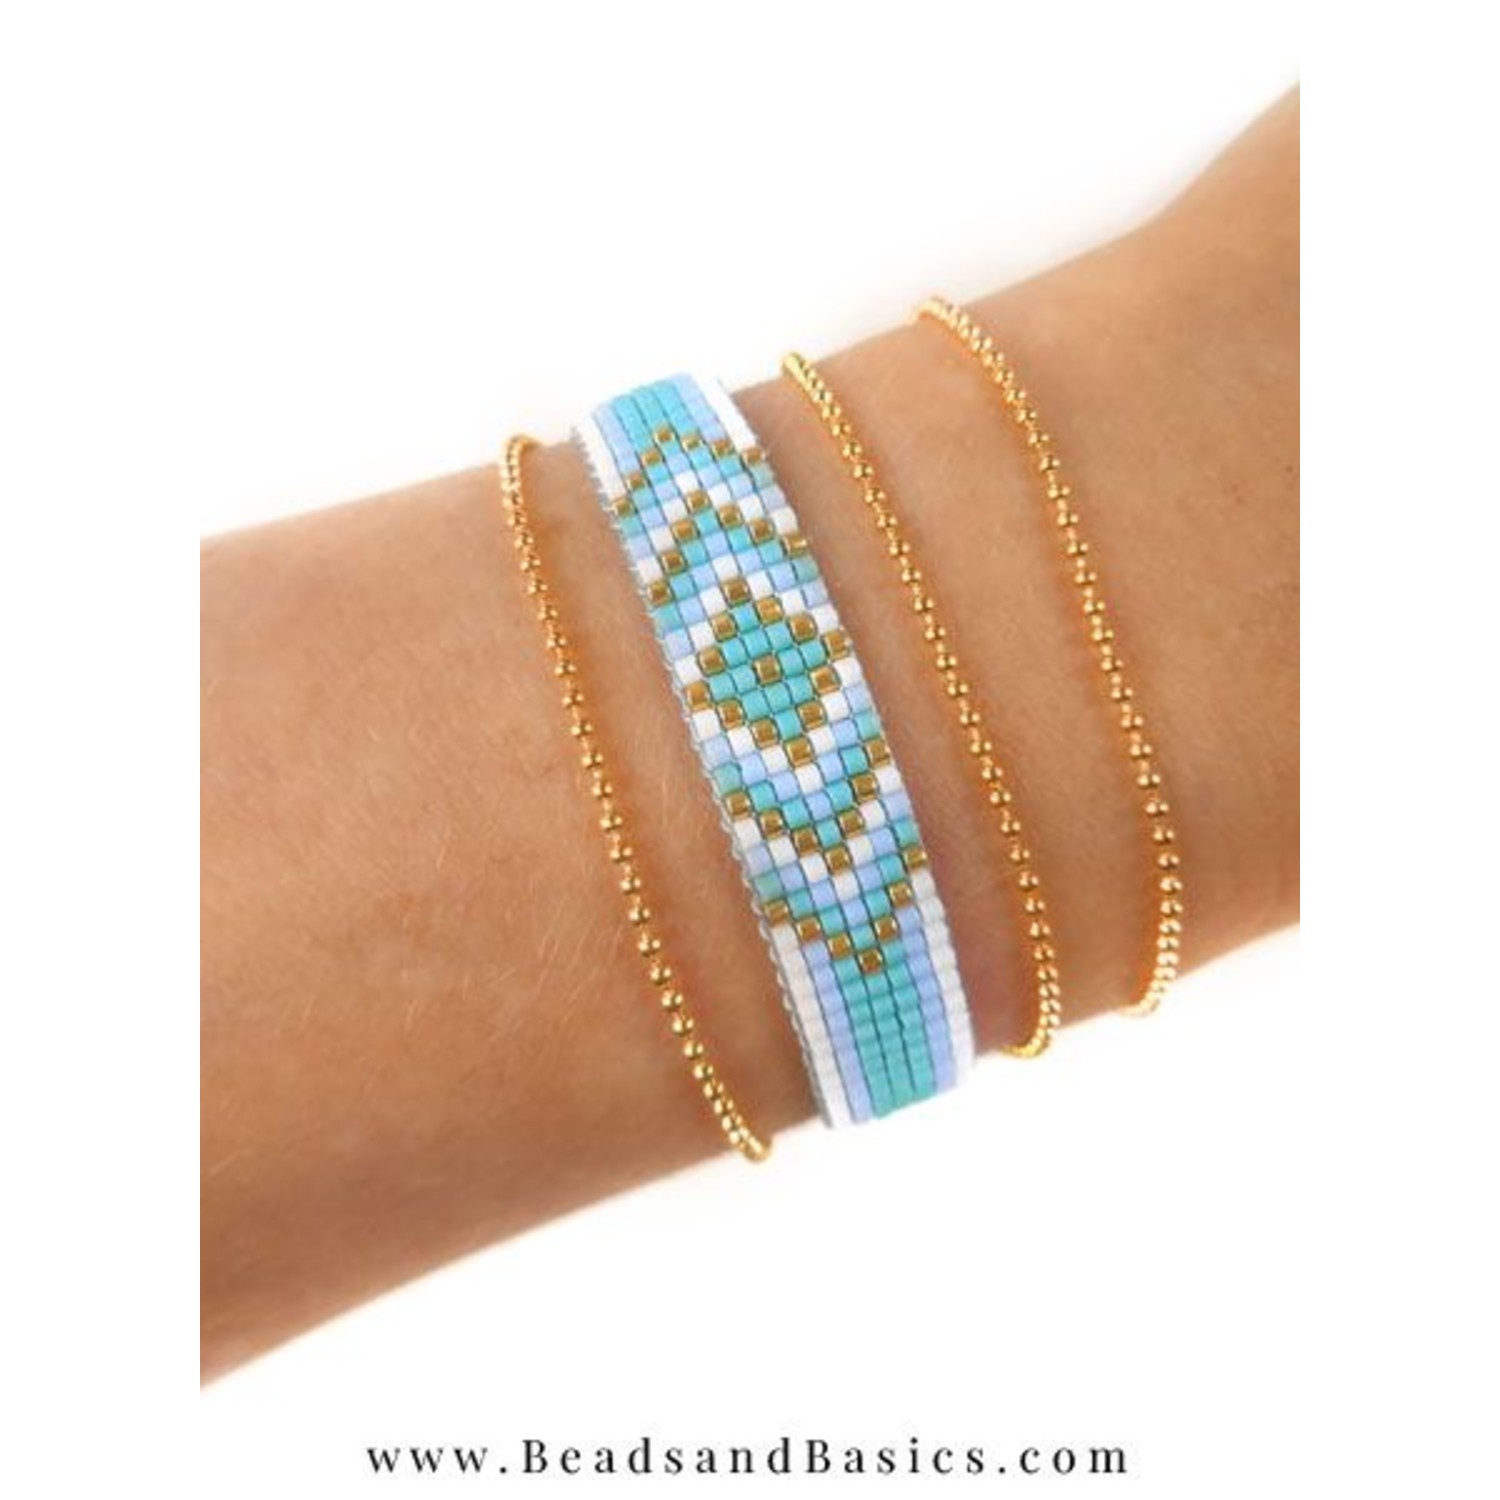 7 Questions To Ask Before You Buy A Beading Pattern - Amy Romeu